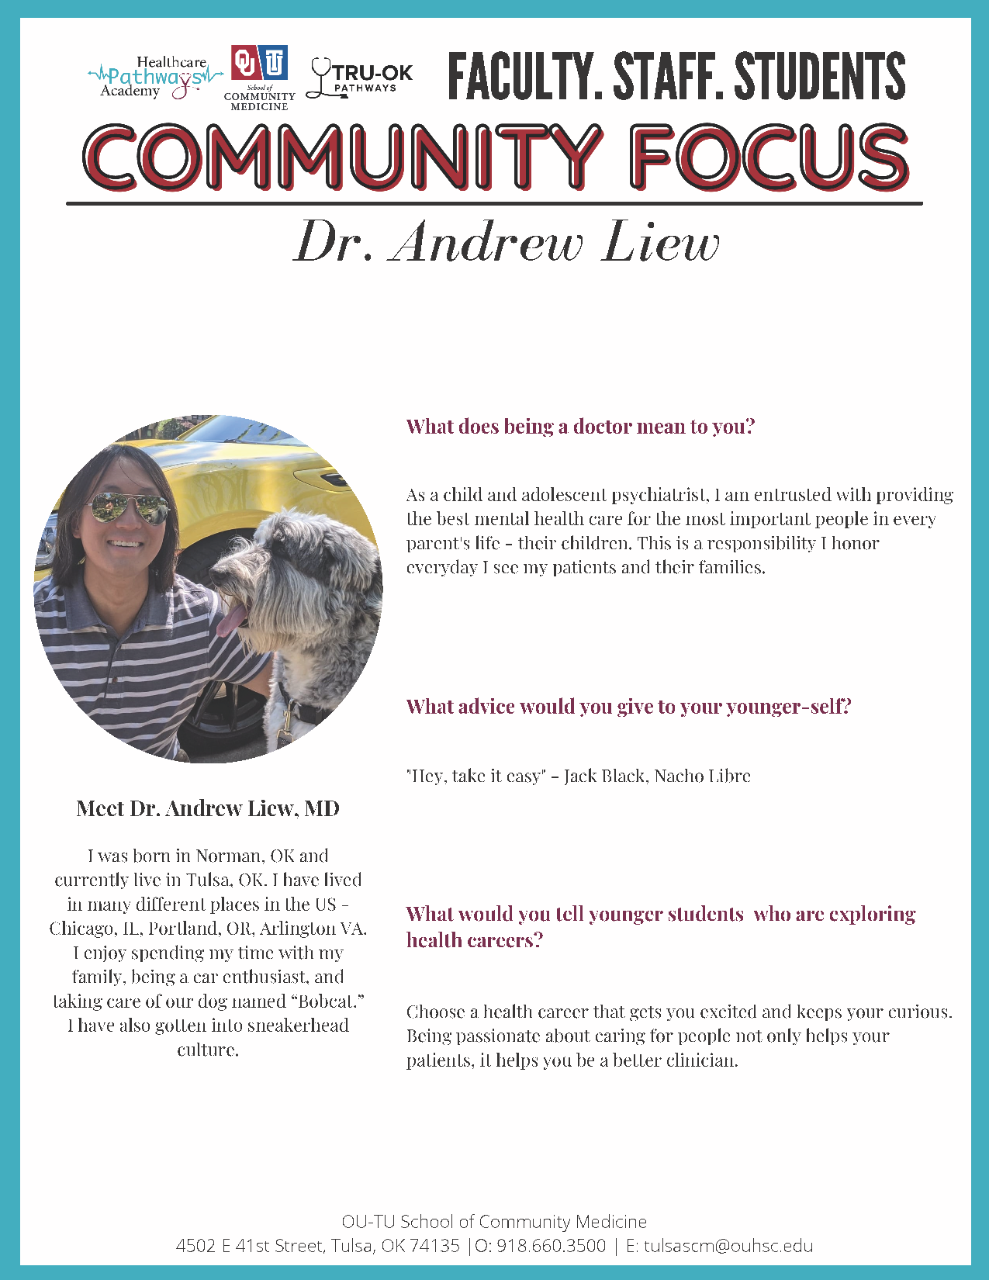 Rosanne Mcdaniel - Community Focus spotlight, a lot of words detailing her experiences and journey